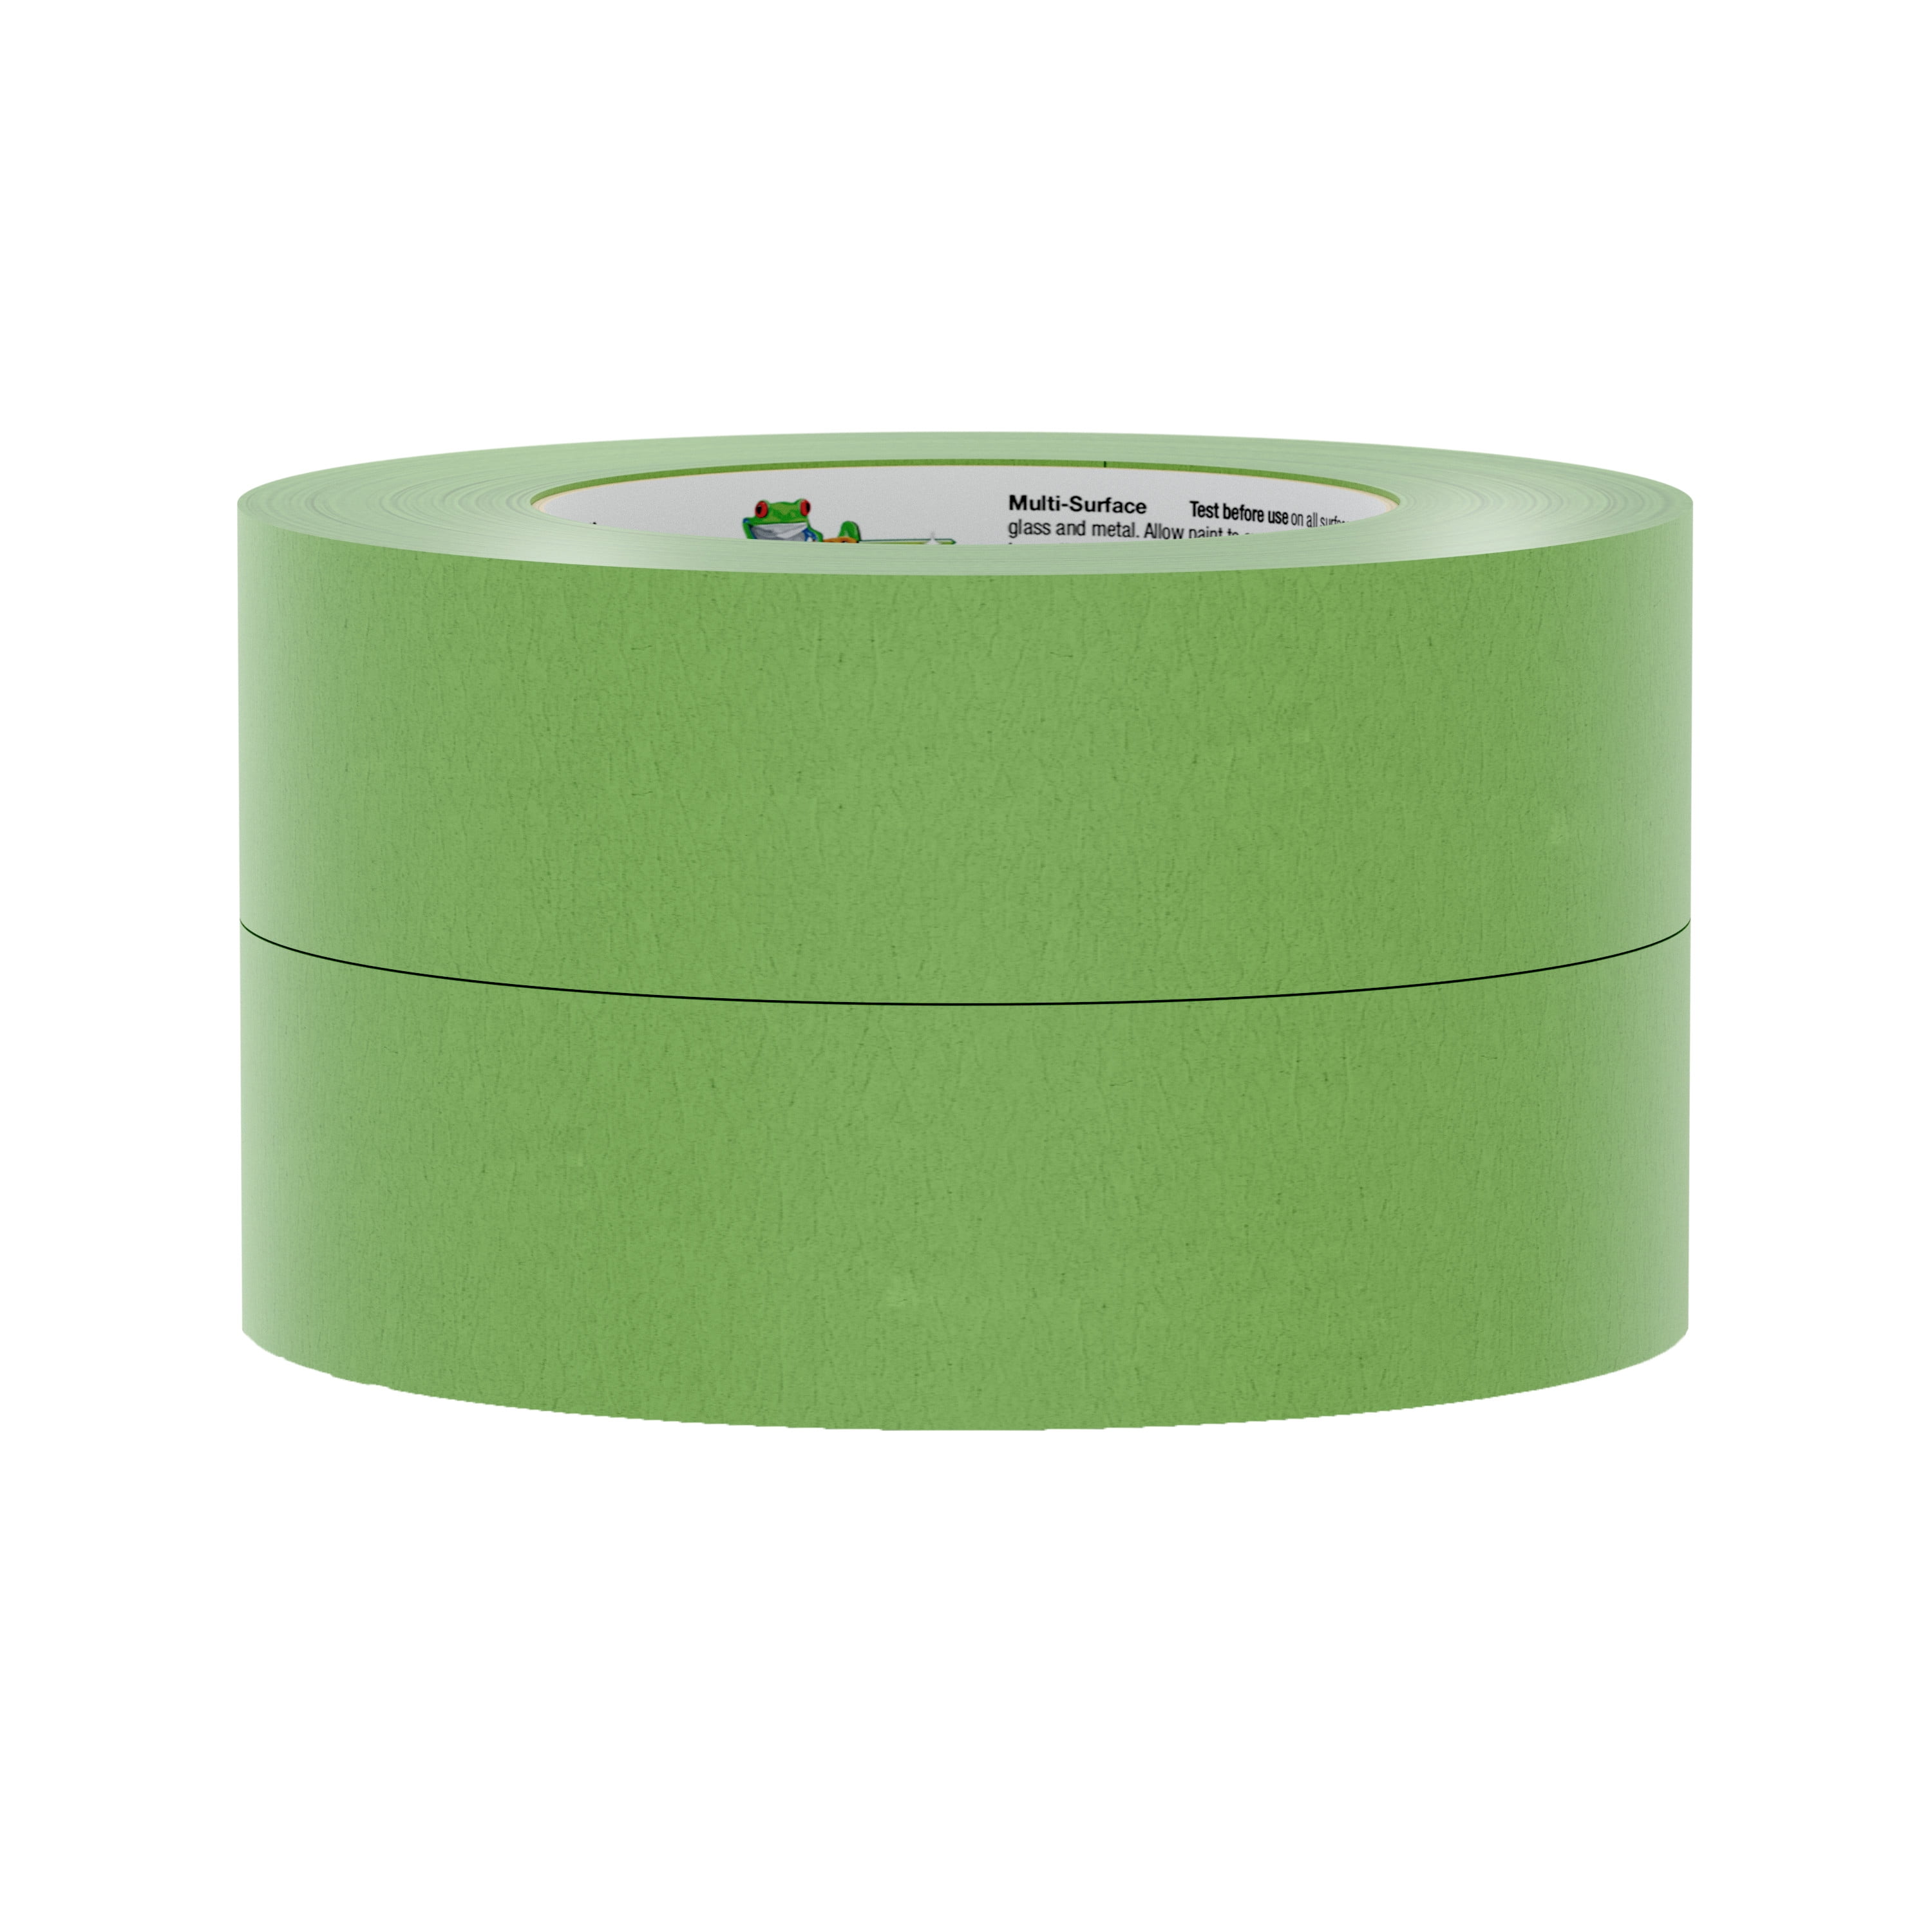 2-PK PAINTER'S MATE Multi-Surface Painter's Tape Green 1.41 IN x